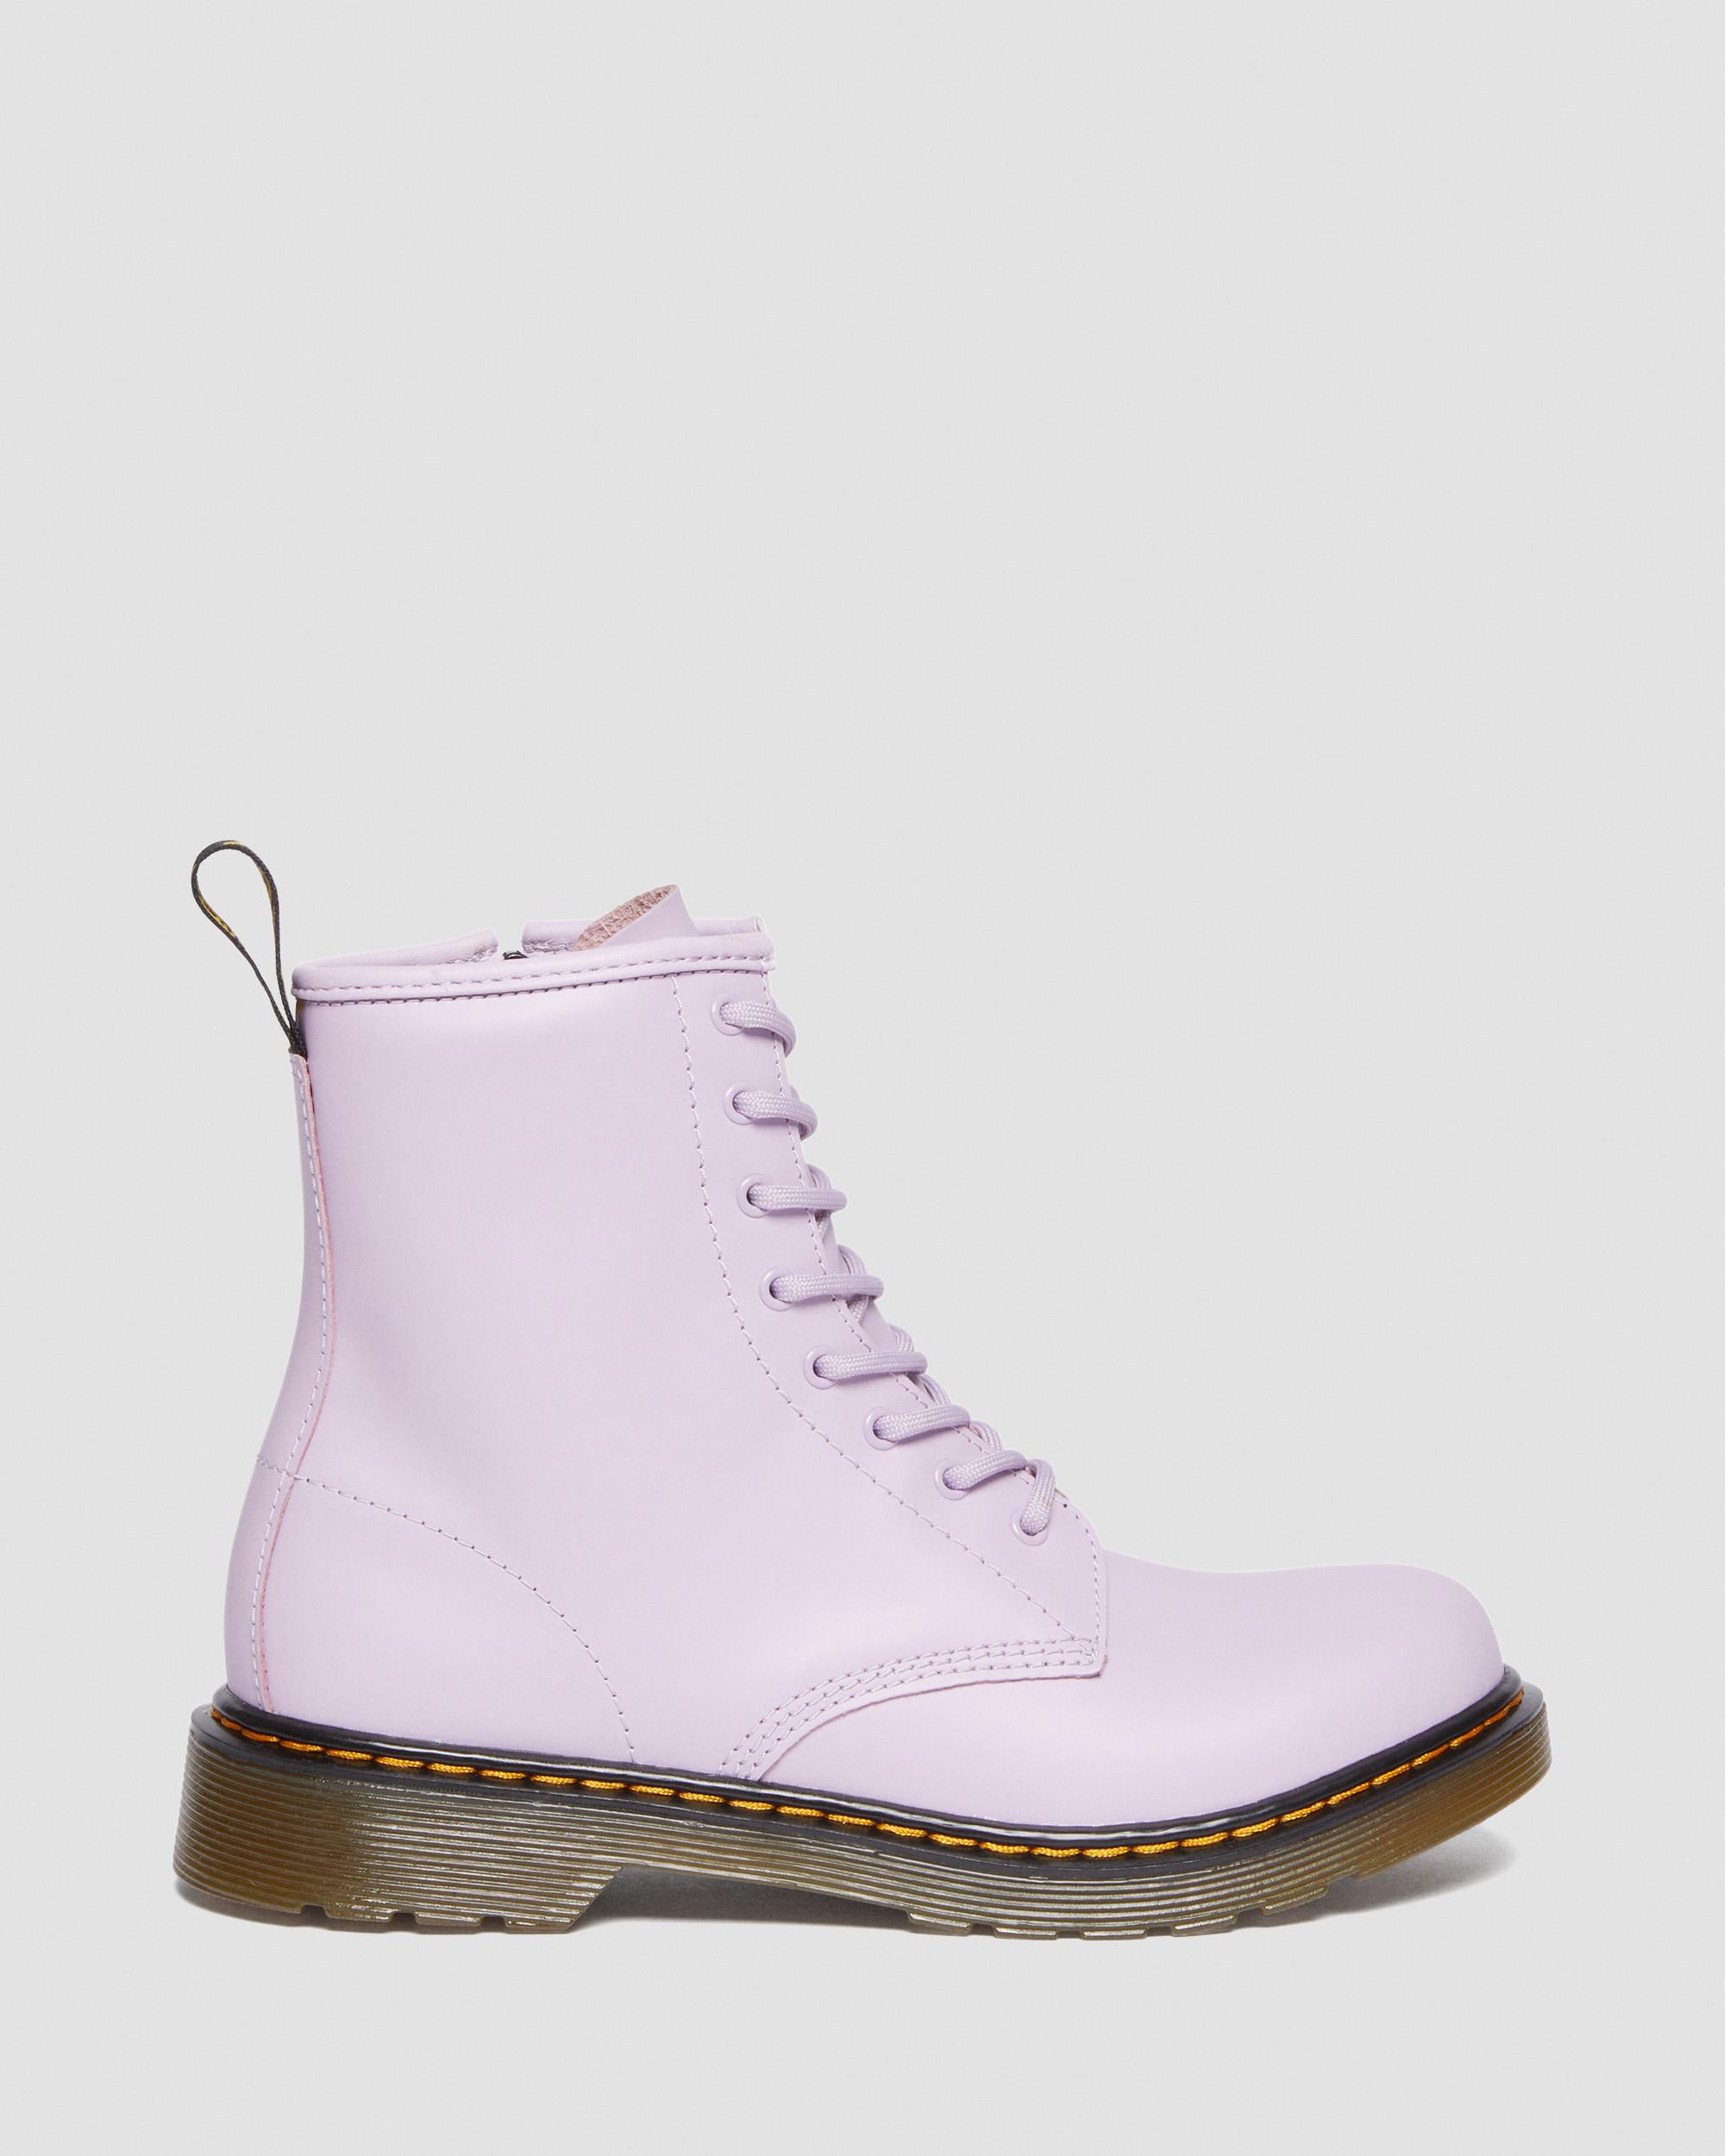 Leather Dr. Youth Romario Up 1460 Boots Martens Lace Lilac | in